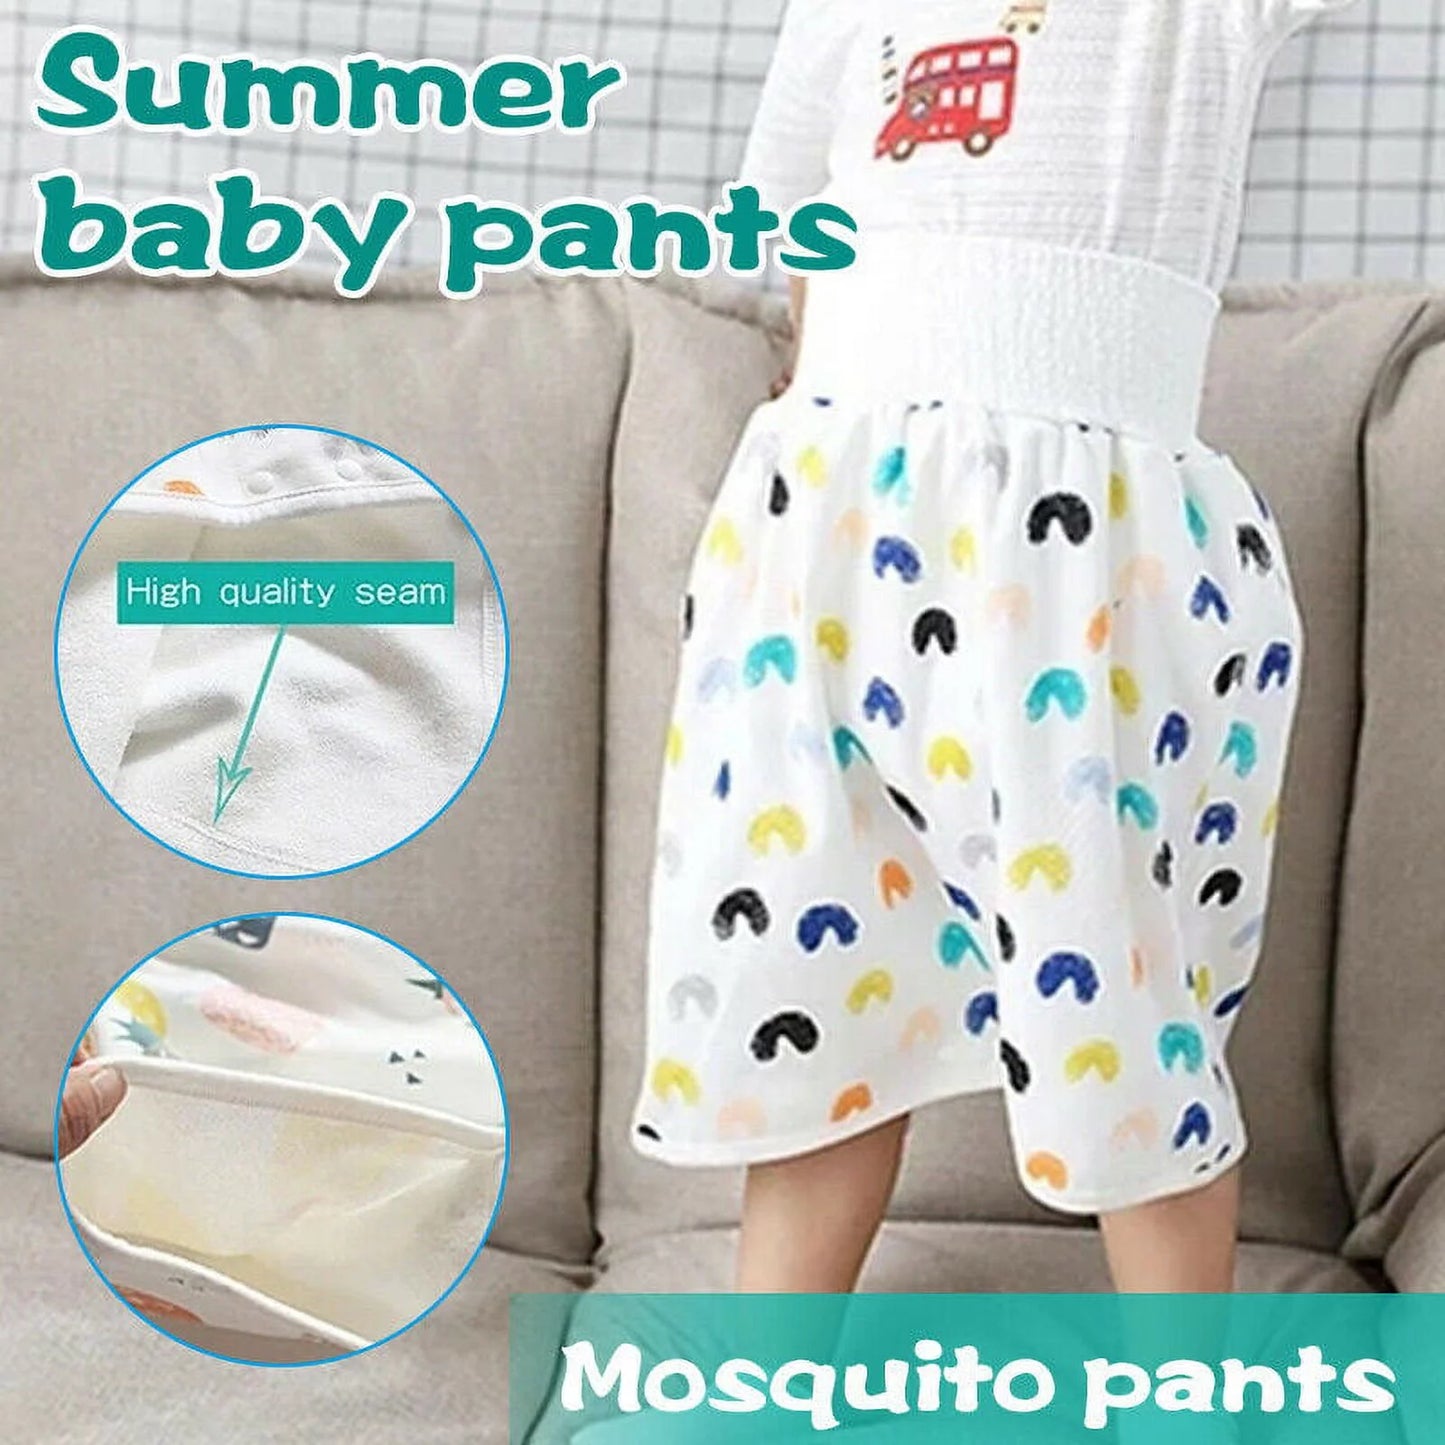 Waterproof Reusable Diaper Skirt - Night Time Reusable Diaper Cover Underwear - Baby Comfy Diaper Short for Boys and Girls